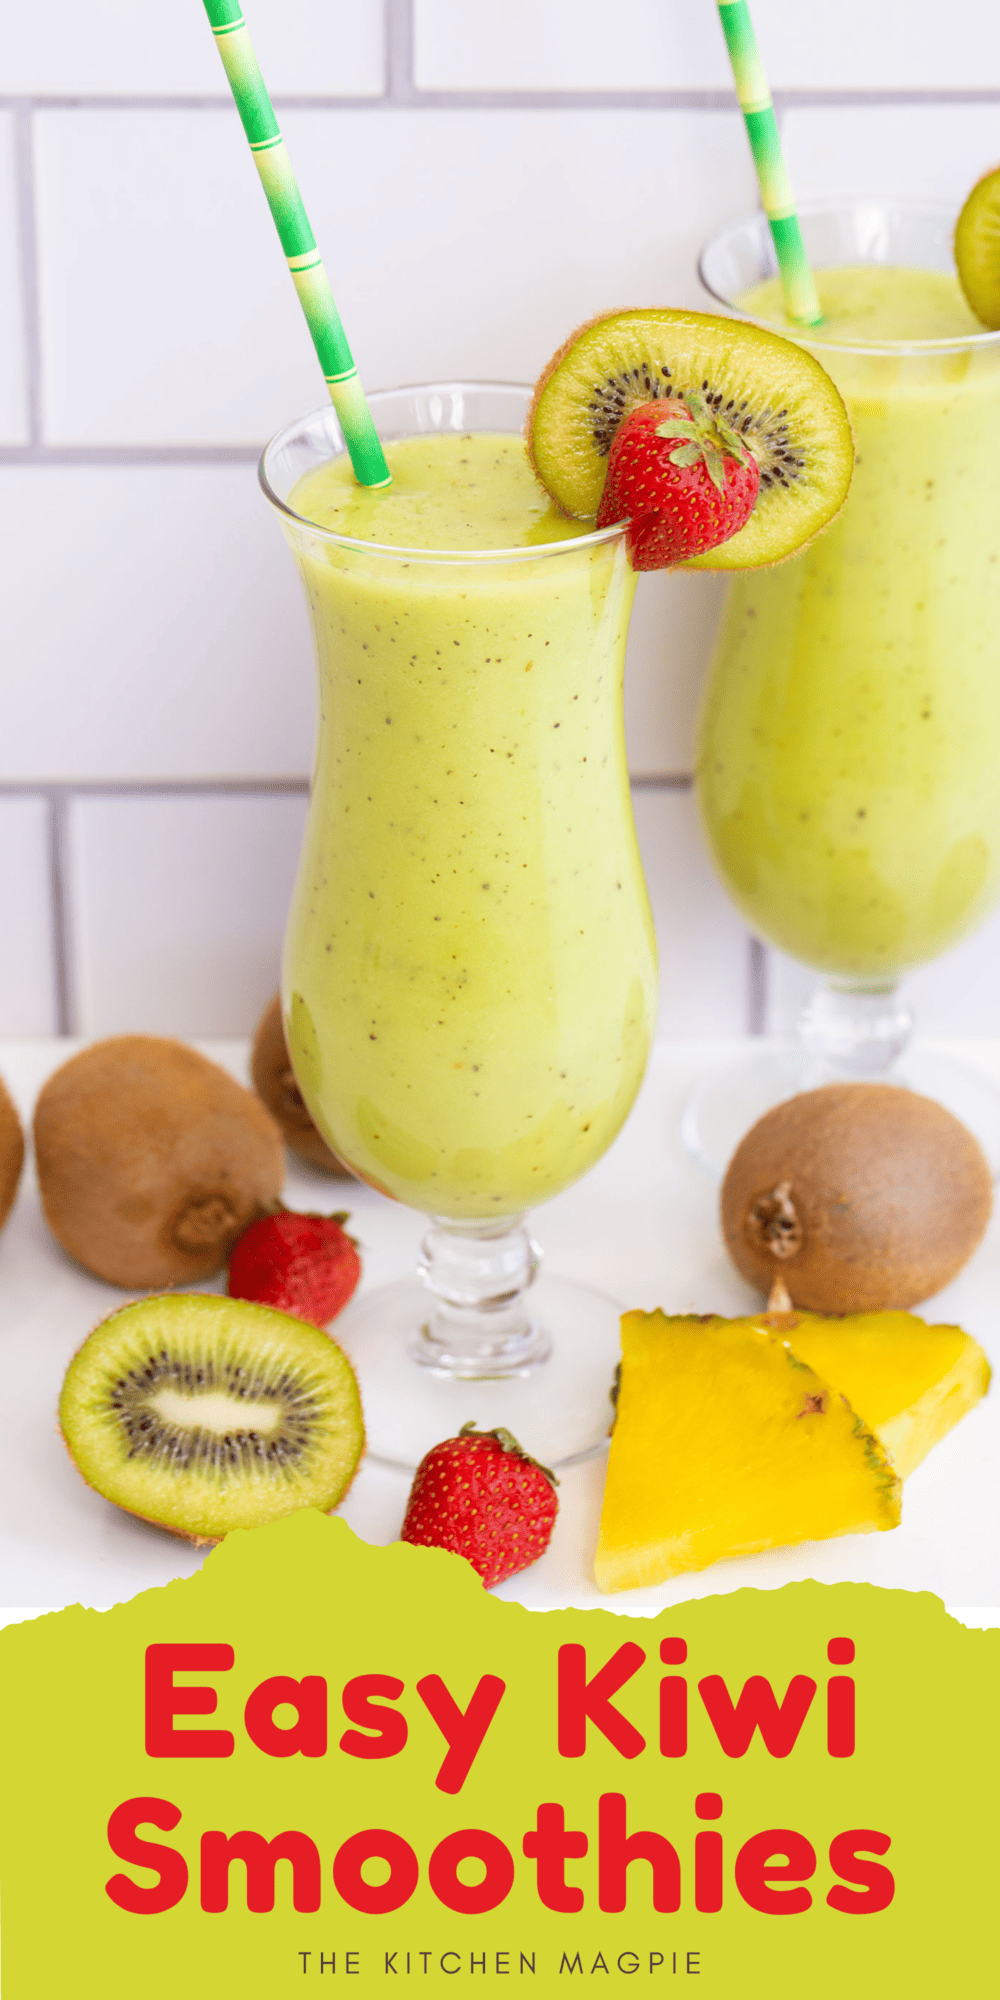 A simple and delicious way to use up leftover fruit to make a healthy pair of smoothies that kids (or you) will love.